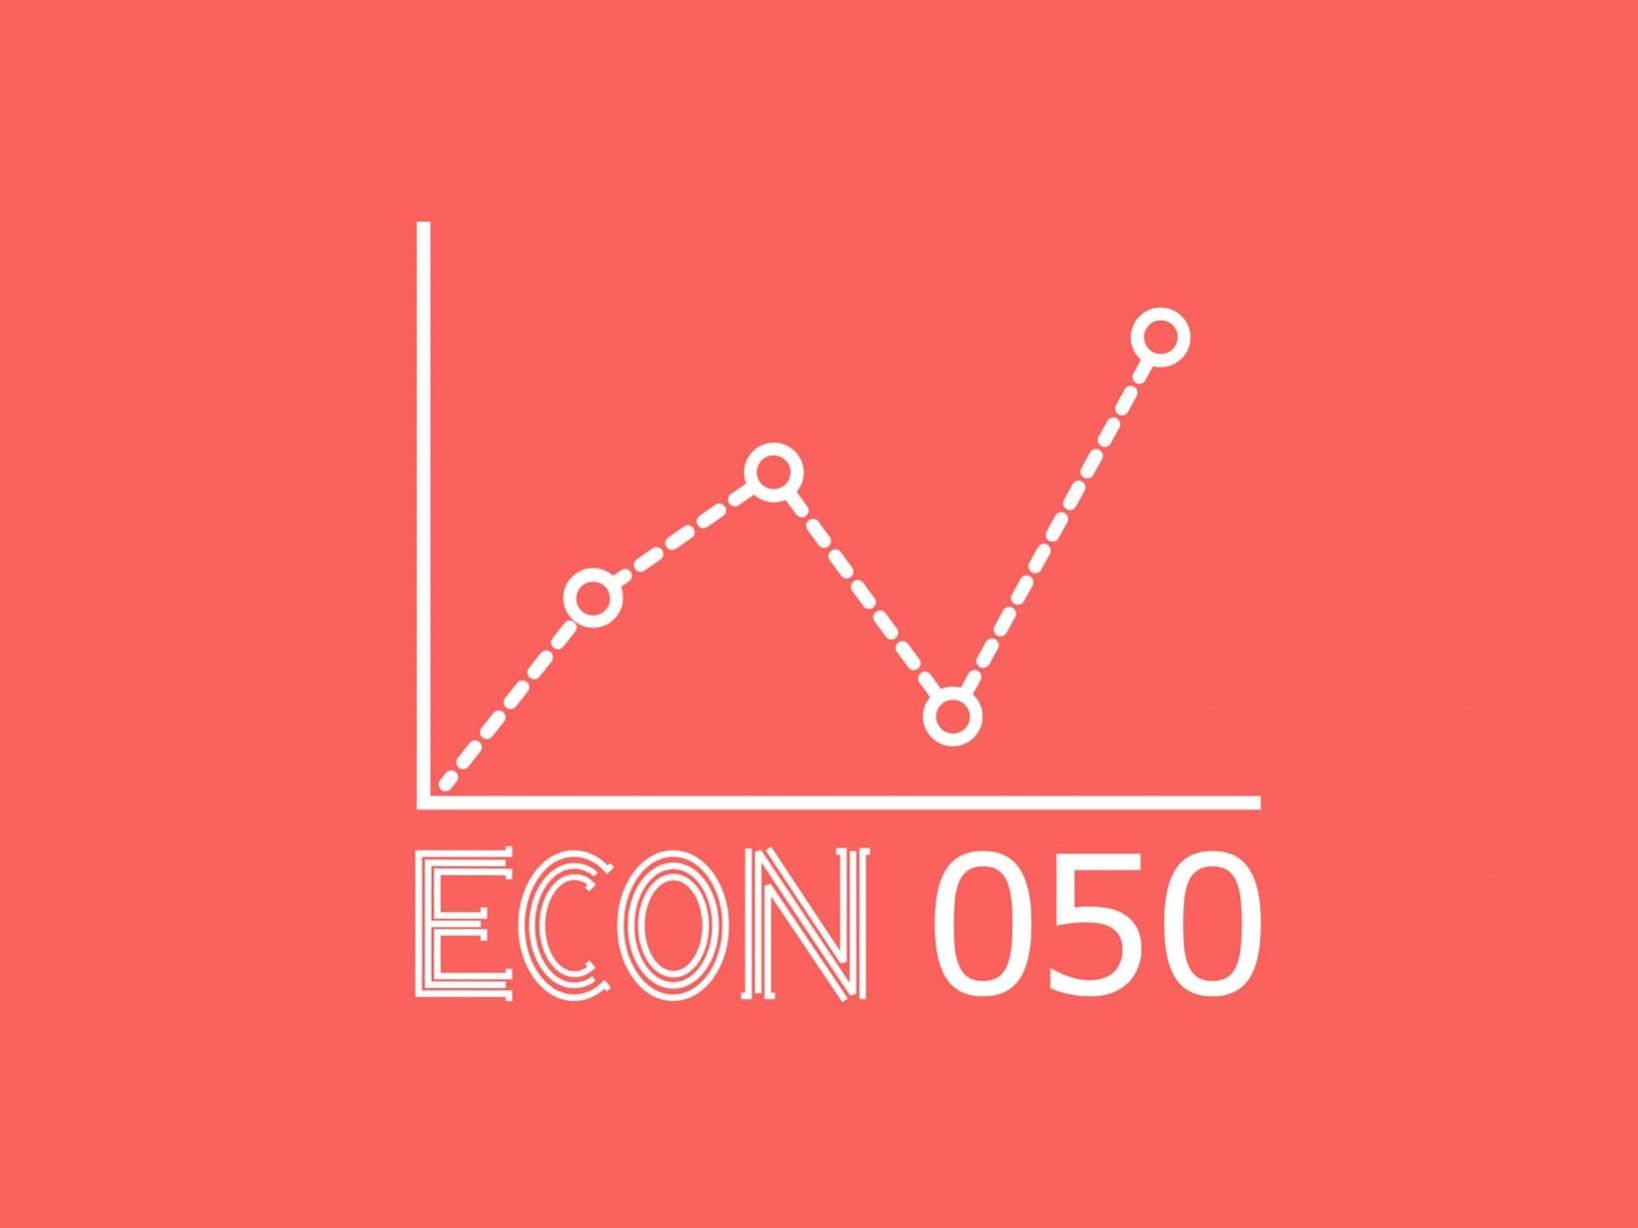 Econ 050 is a podcast made in partnership between the Faculty of Economics and Business and The Northern Times.